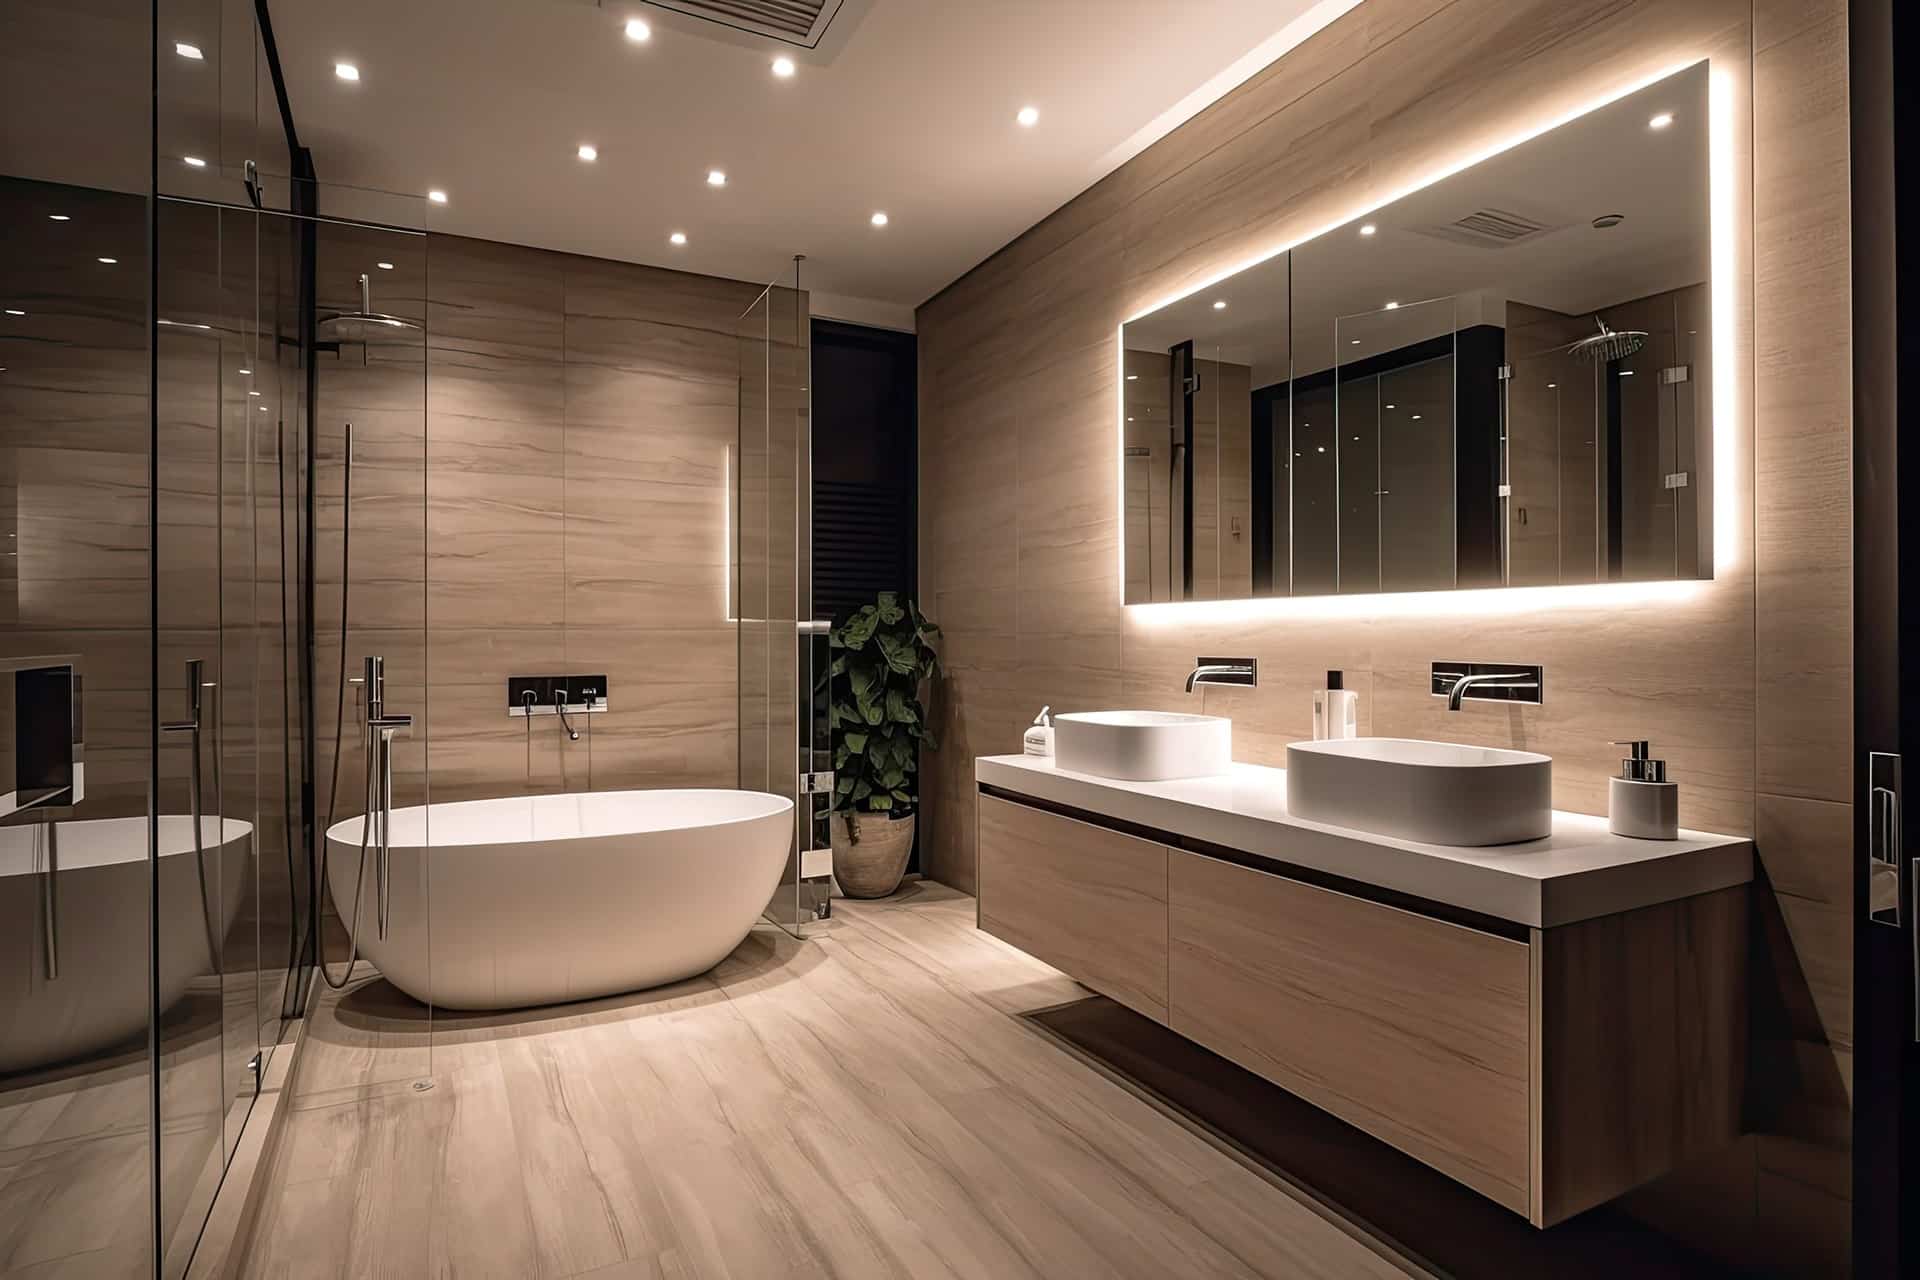 A Luxurious Bathroom Renovation Turning Dreams into Reality